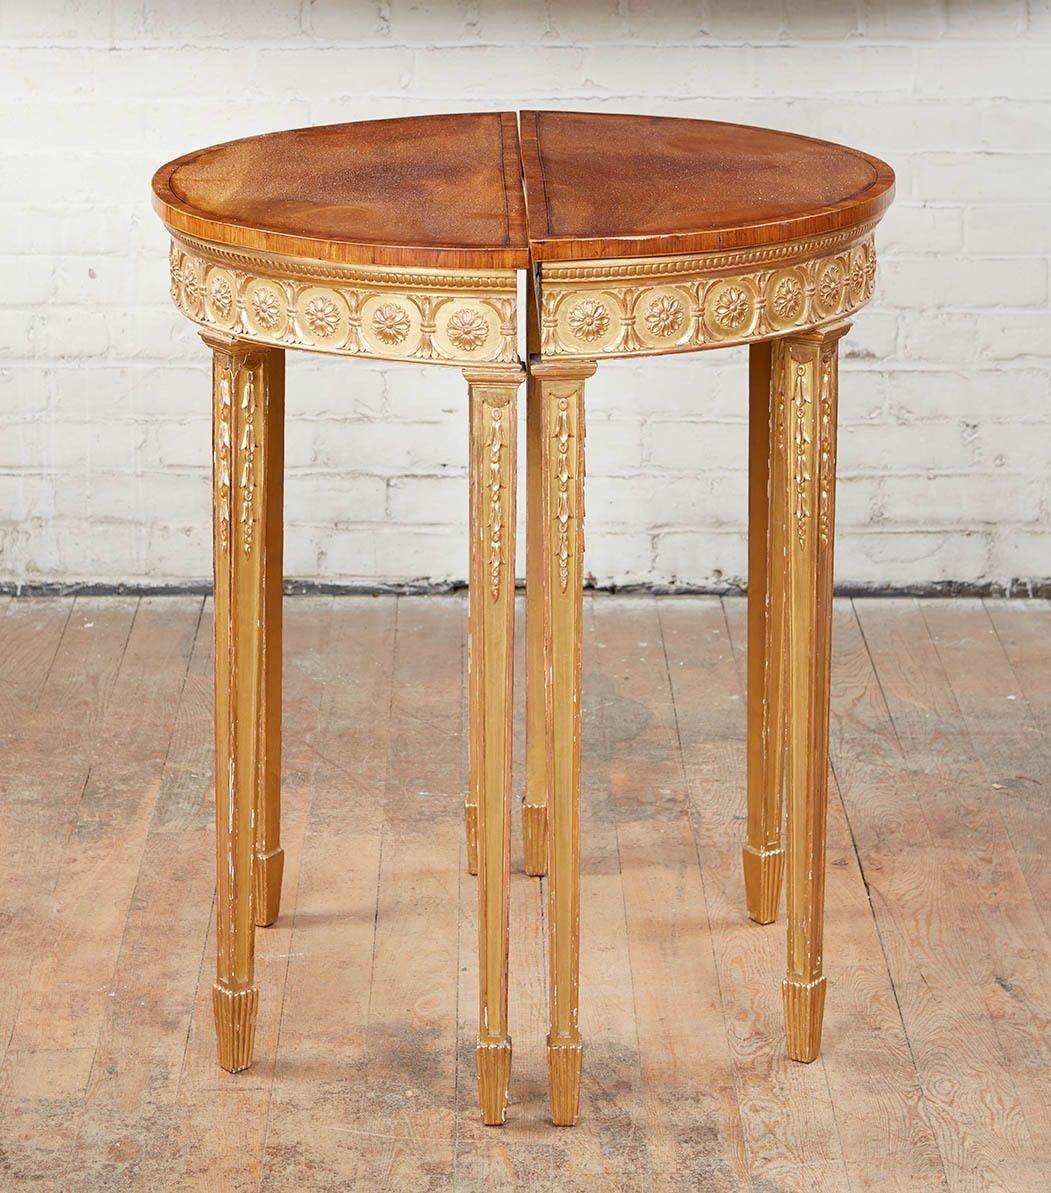 Fine pair of George III demilune console tables having mahogany tops cross banded with kingwood, over gilt wood base having rosette decorated apron and standing on square tapered legs having carved bellflowers and standing on fluted spade feet.